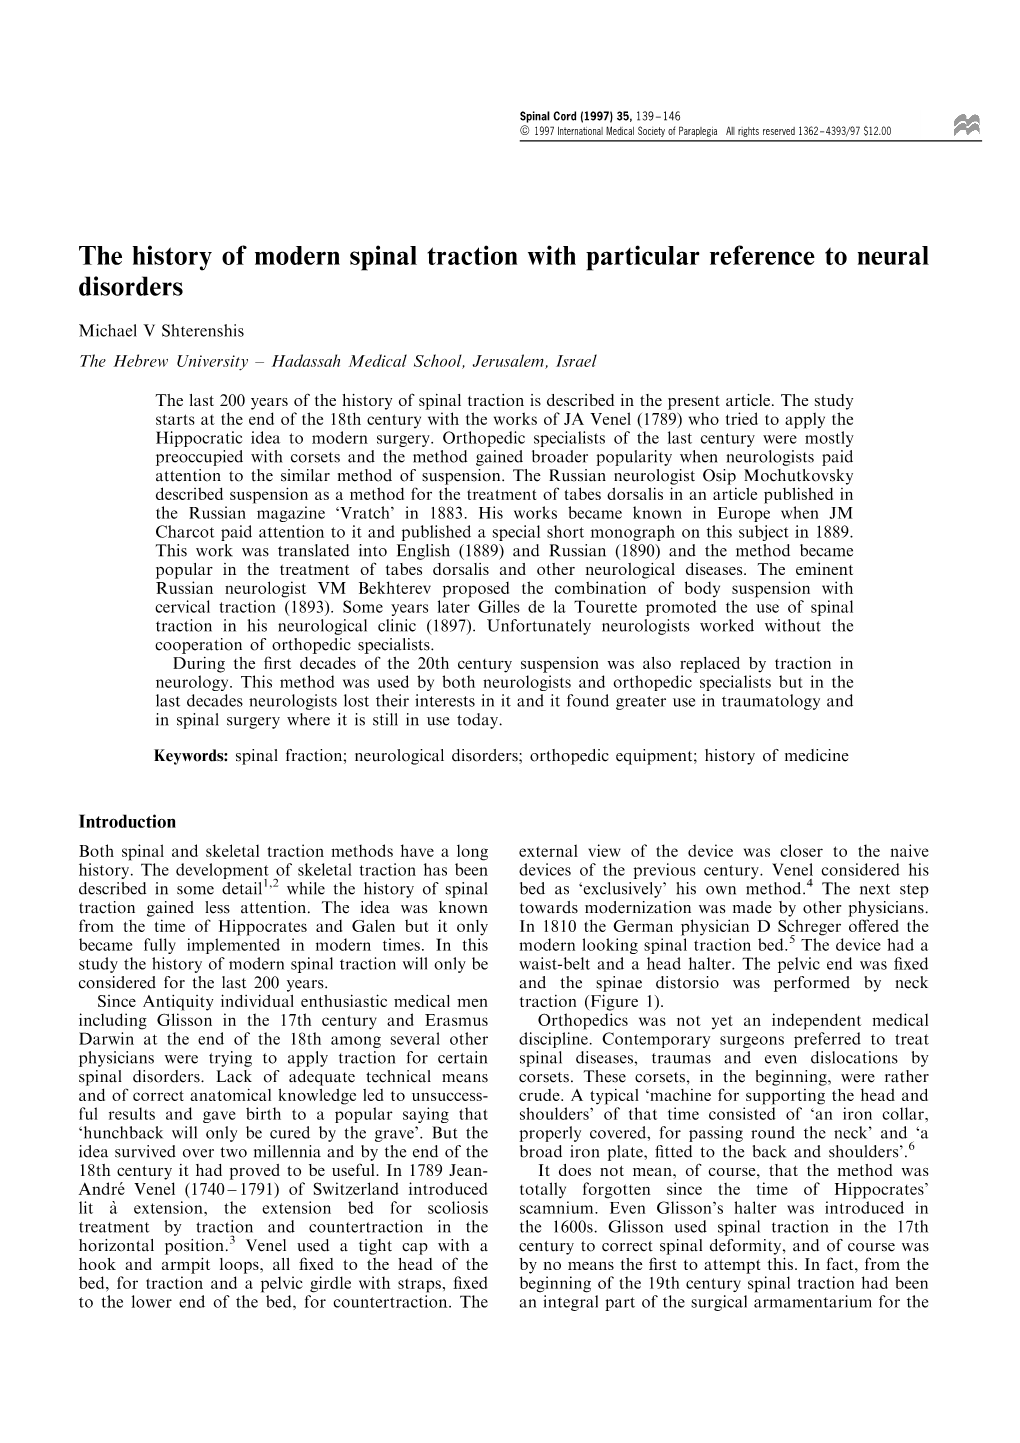 The History of Modern Spinal Traction with Particular Reference to Neural Disorders